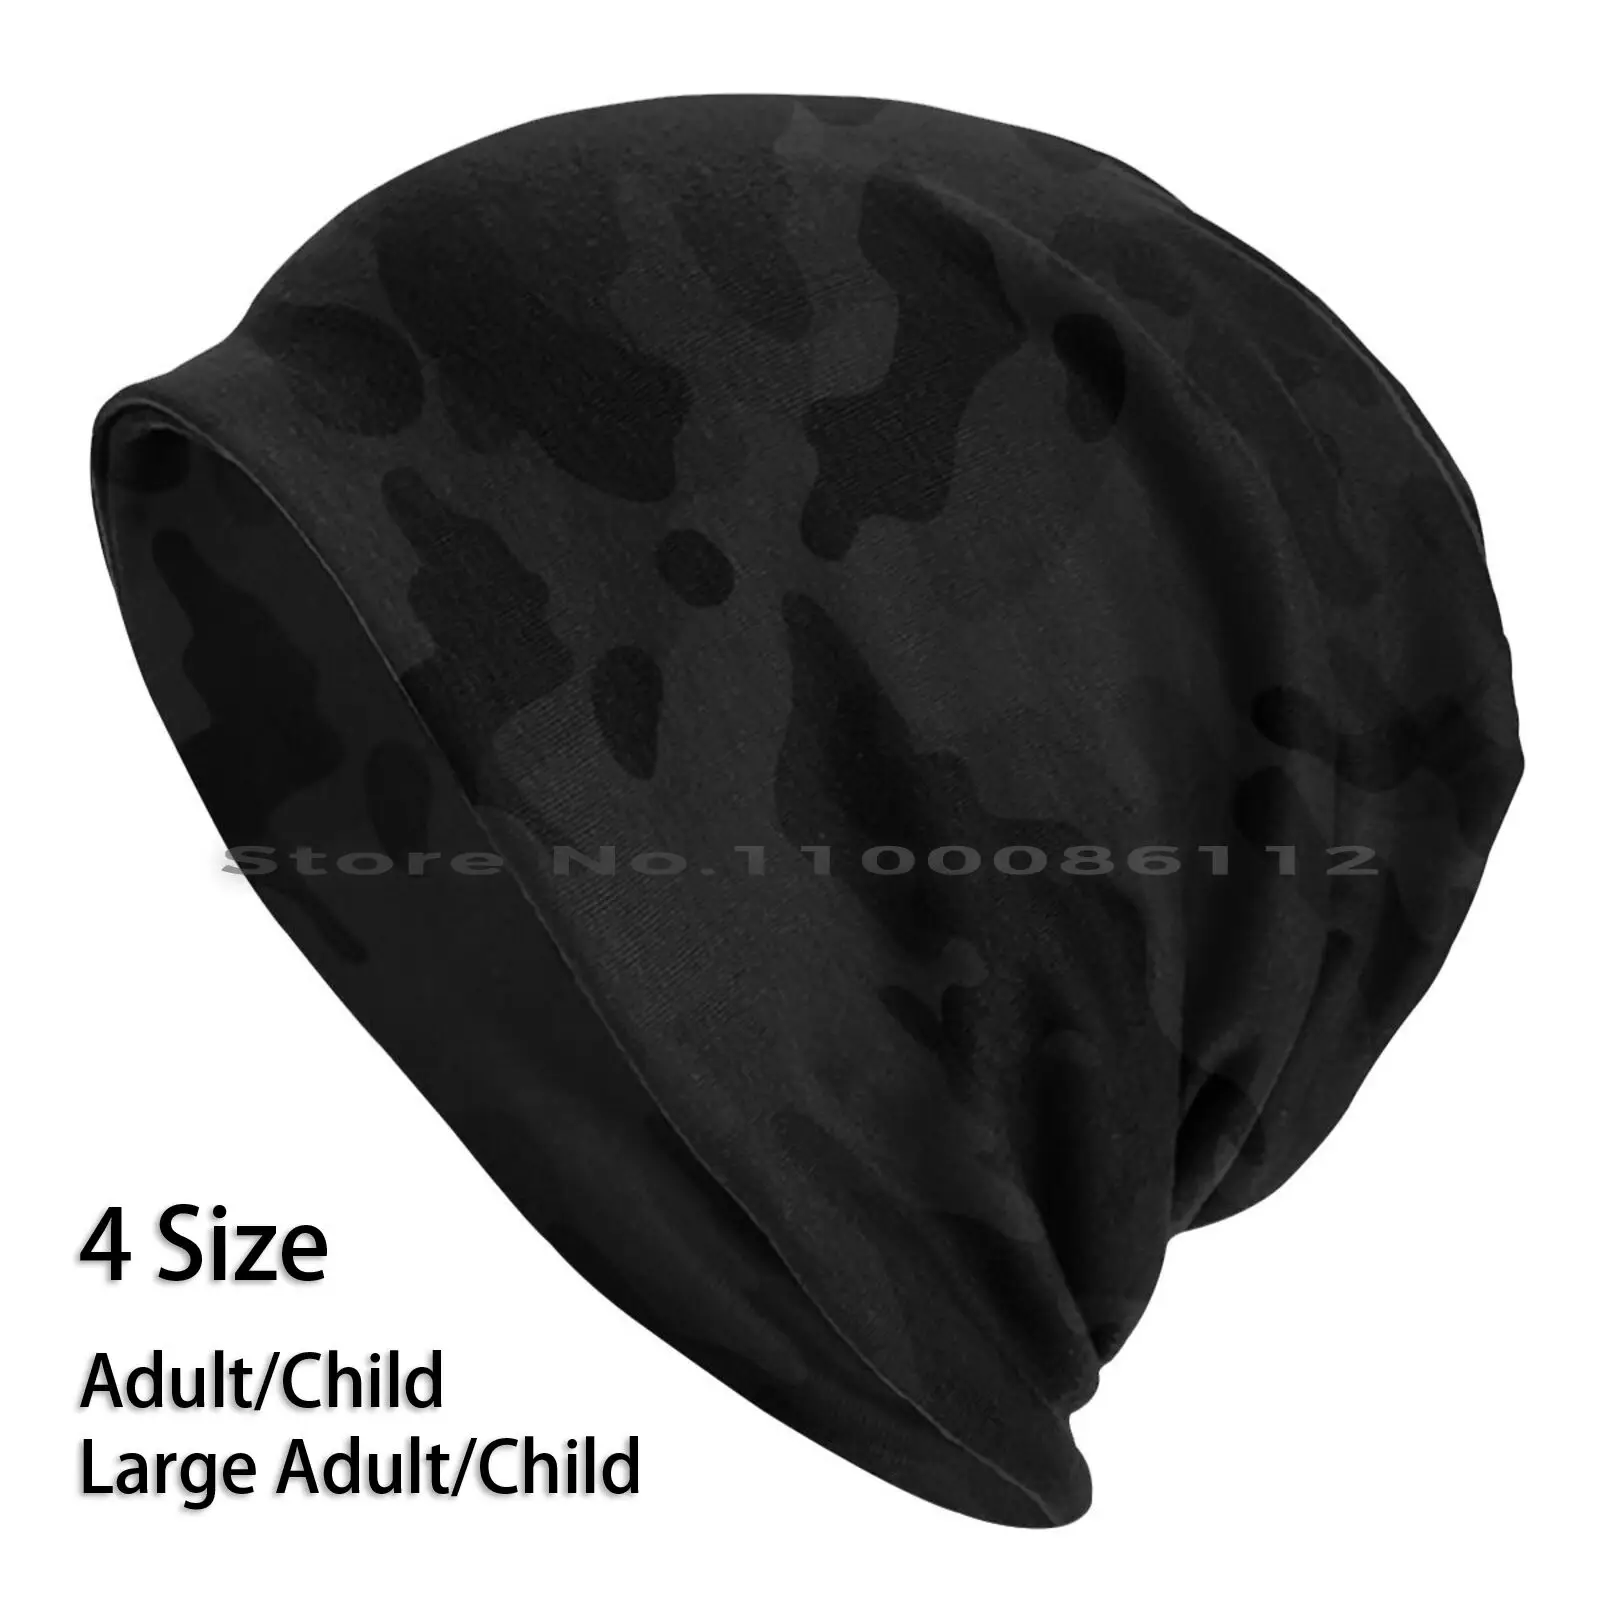 

Midnight Camo Beanies Knit Hat Usa Maga Midnight White Black Sand Camouflage Pattern Army Navy Military Counterstrike Modern